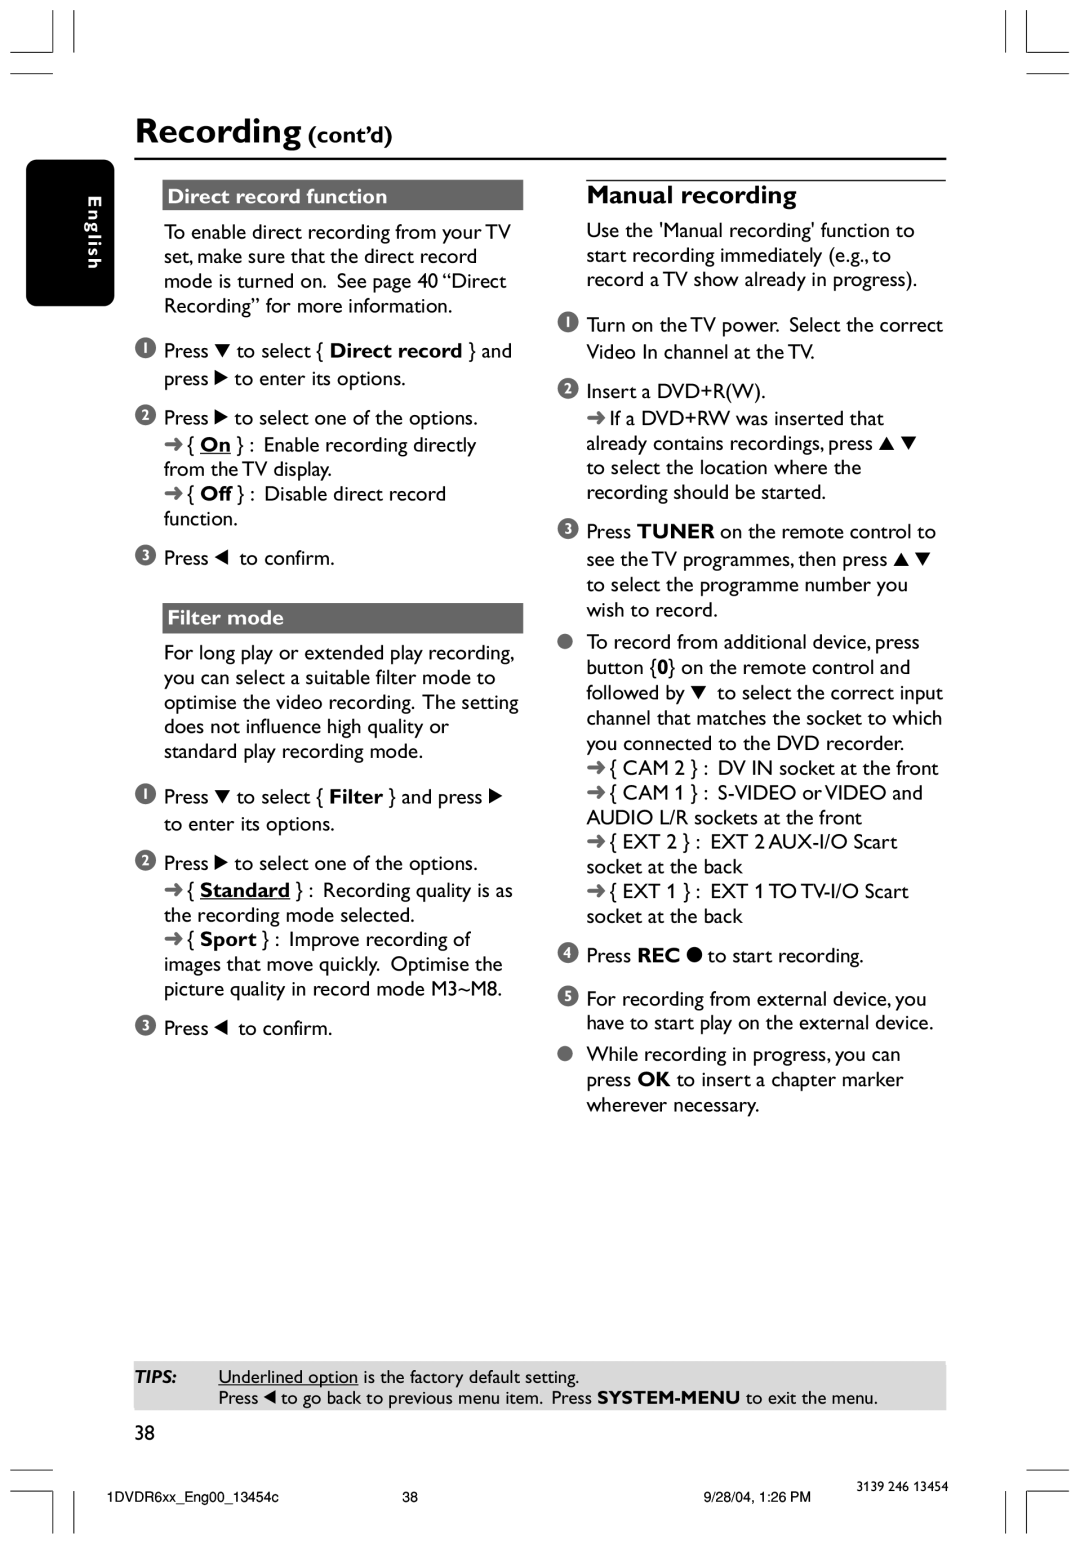 Philips DVDR612/97 user manual Recording cont’d, Manual recording, Direct record function, Filter mode 